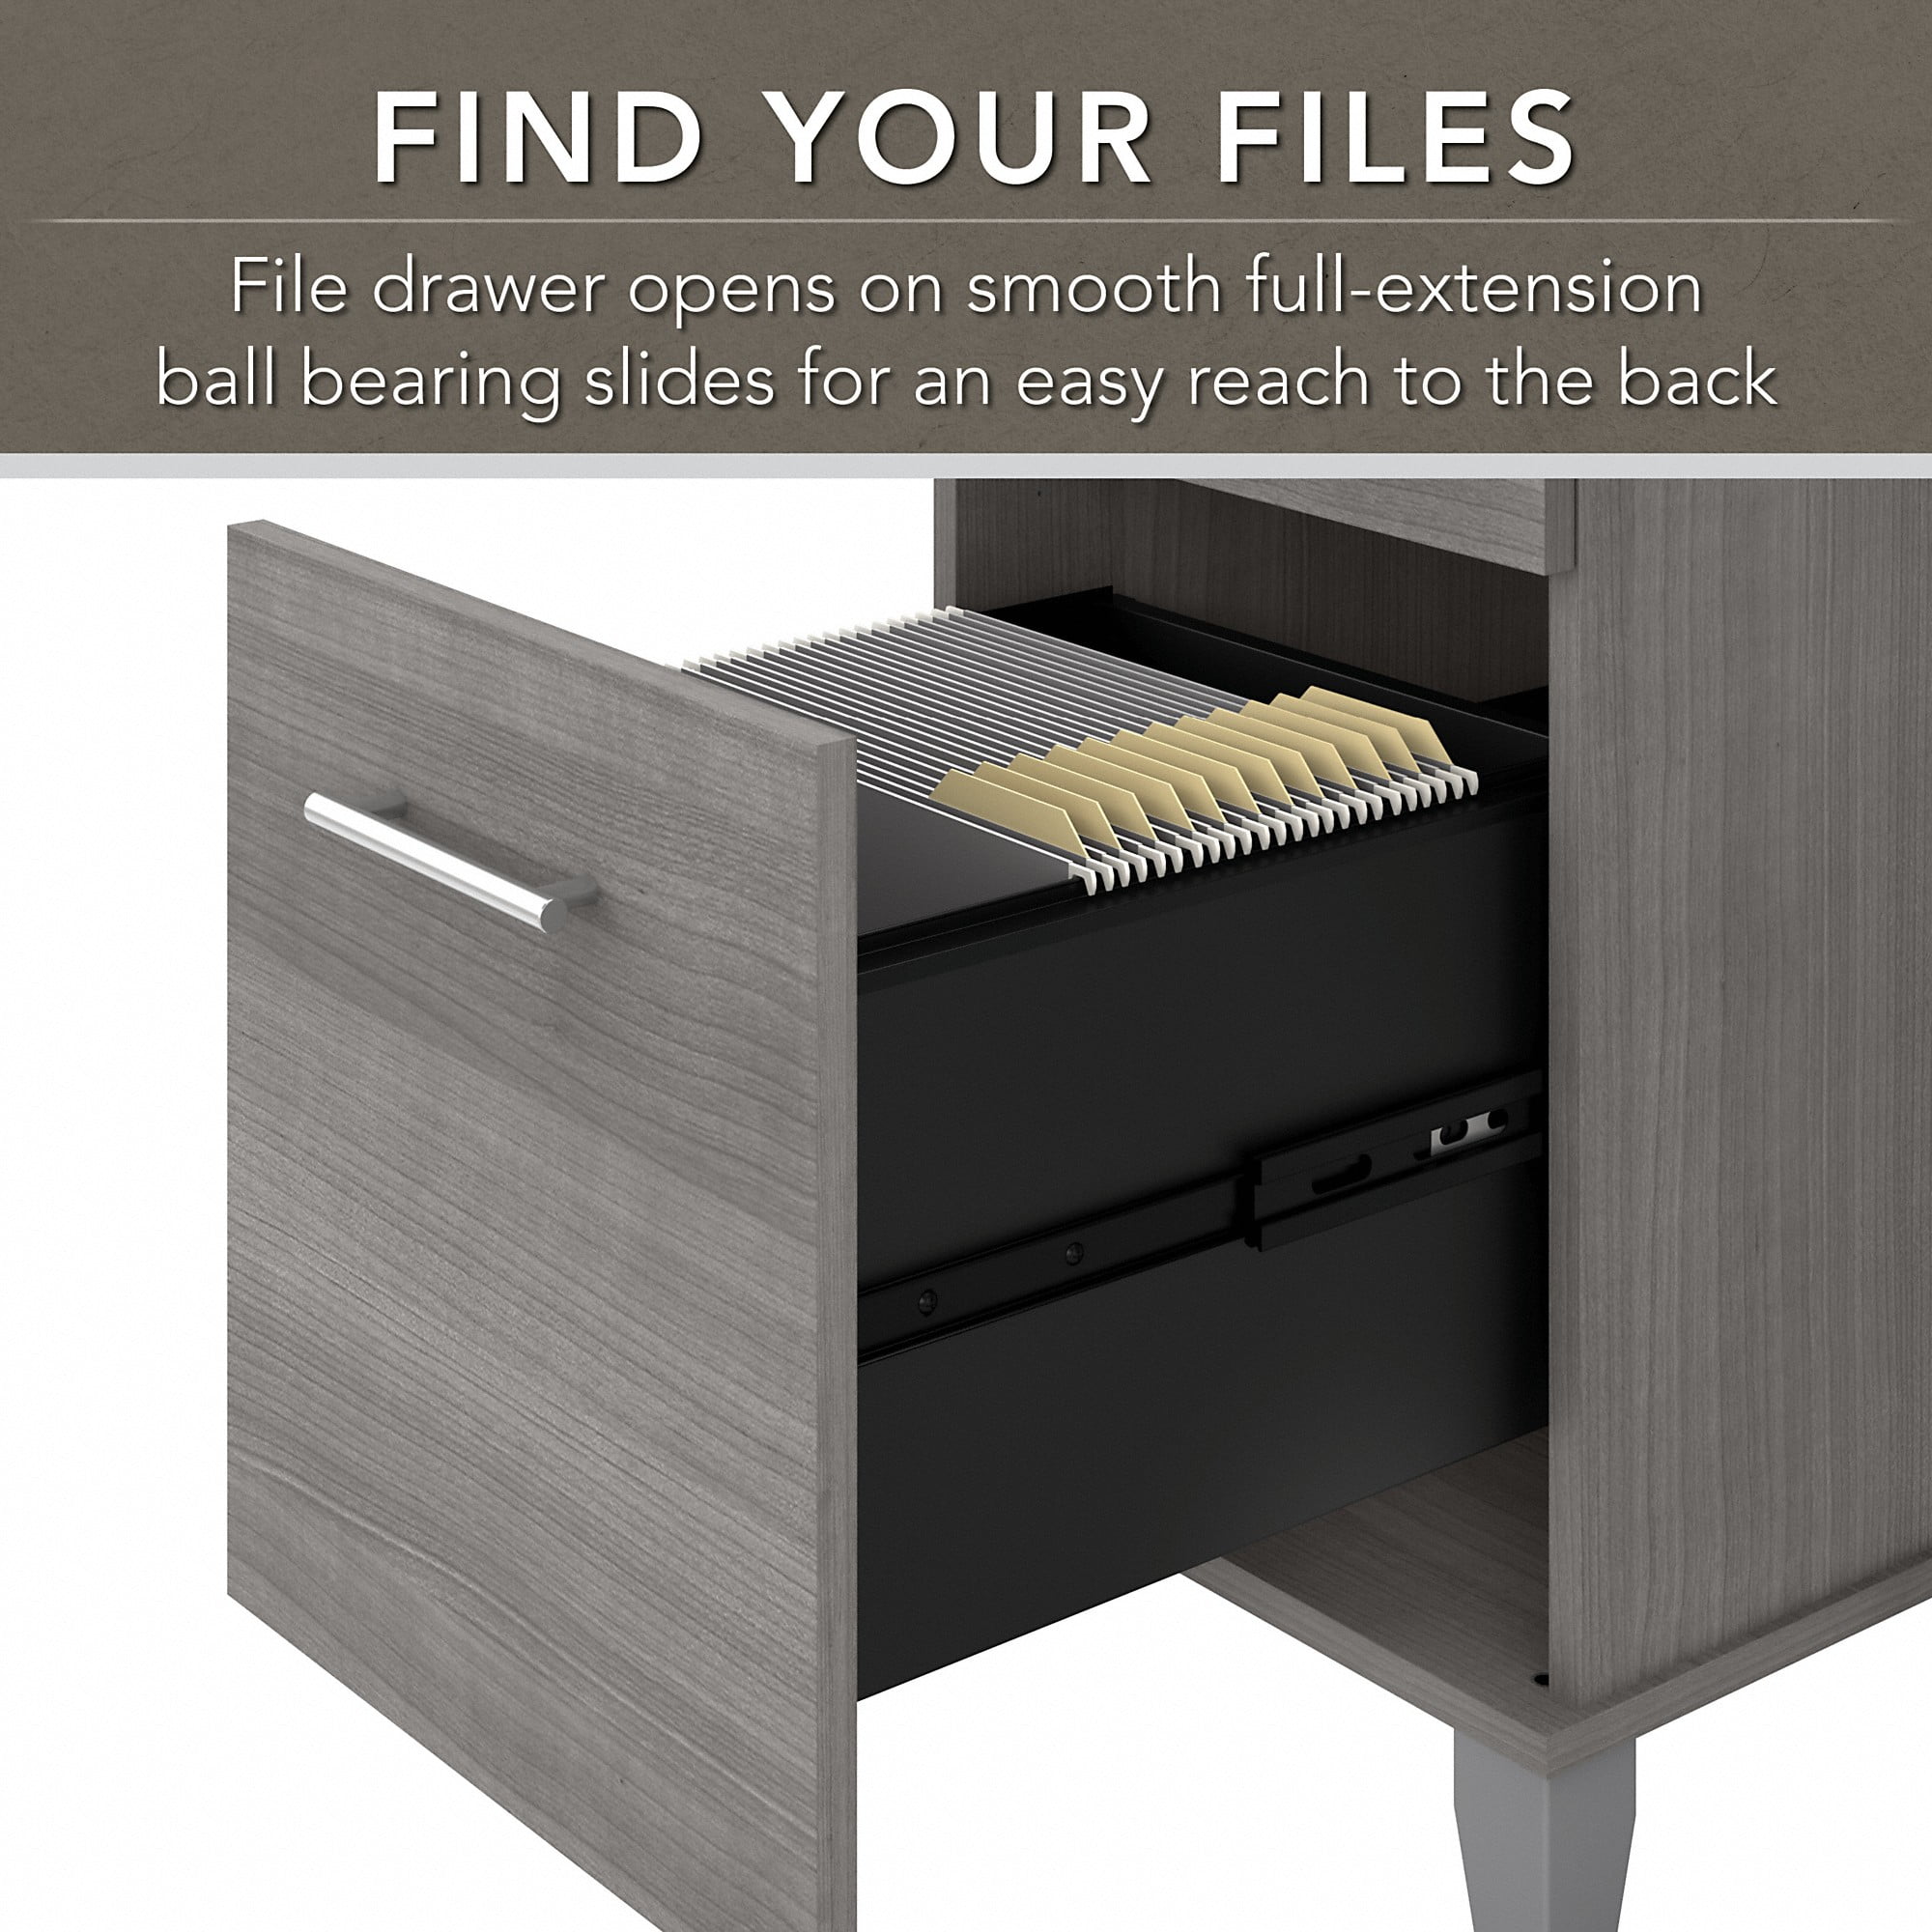 Pencil Drawer by Bush Furnishings SCA694 - 1-800-531-1354 - Free Shipping -  GSA Government Furniture 2go.com